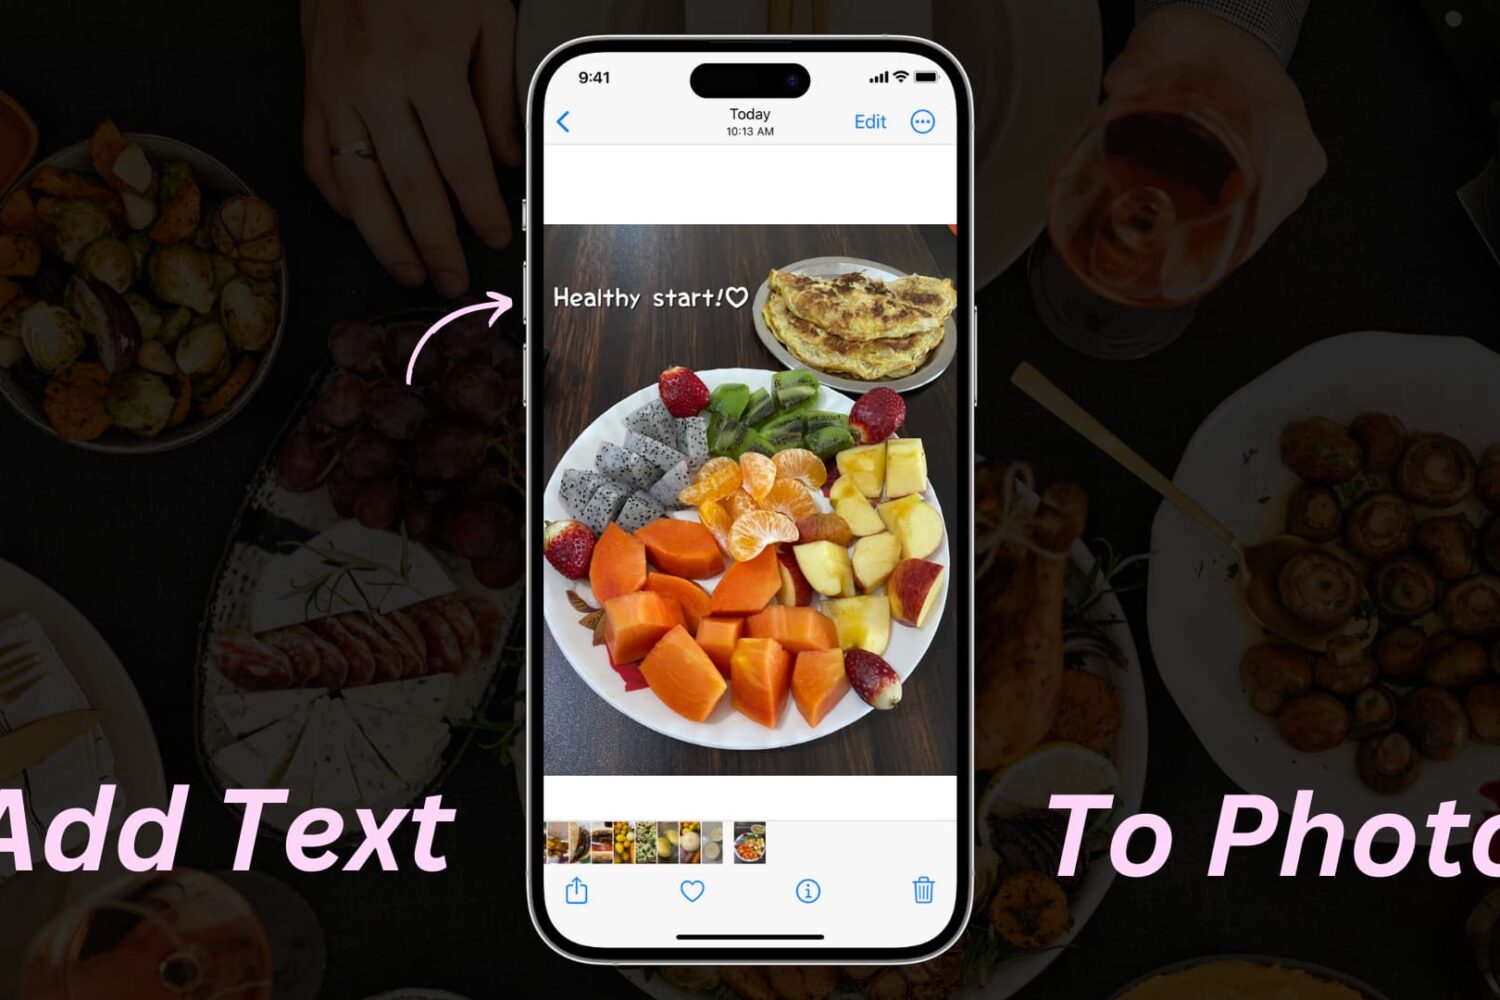 Add text to photo on iPhone